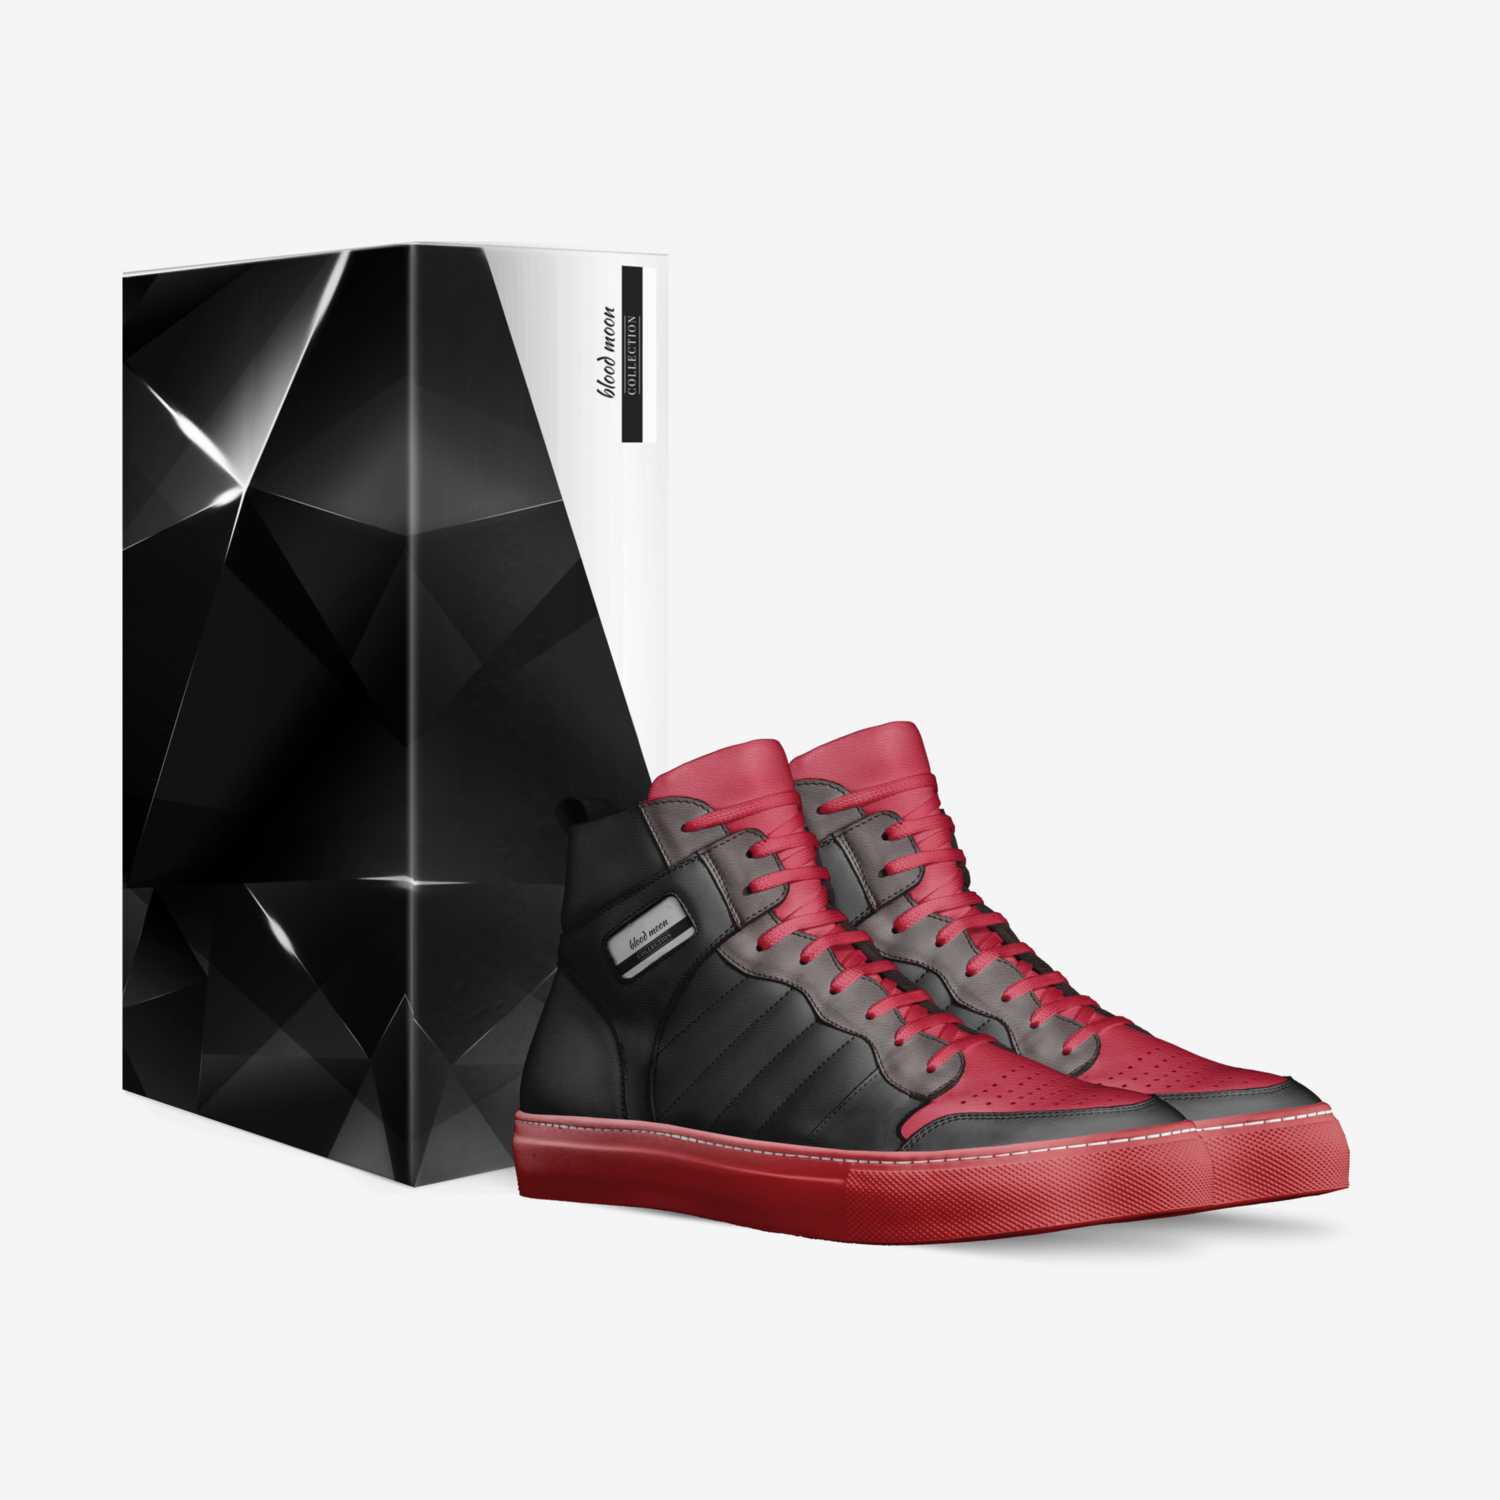 blood moon custom made in Italy shoes by Jeremiahdelavega | Box view